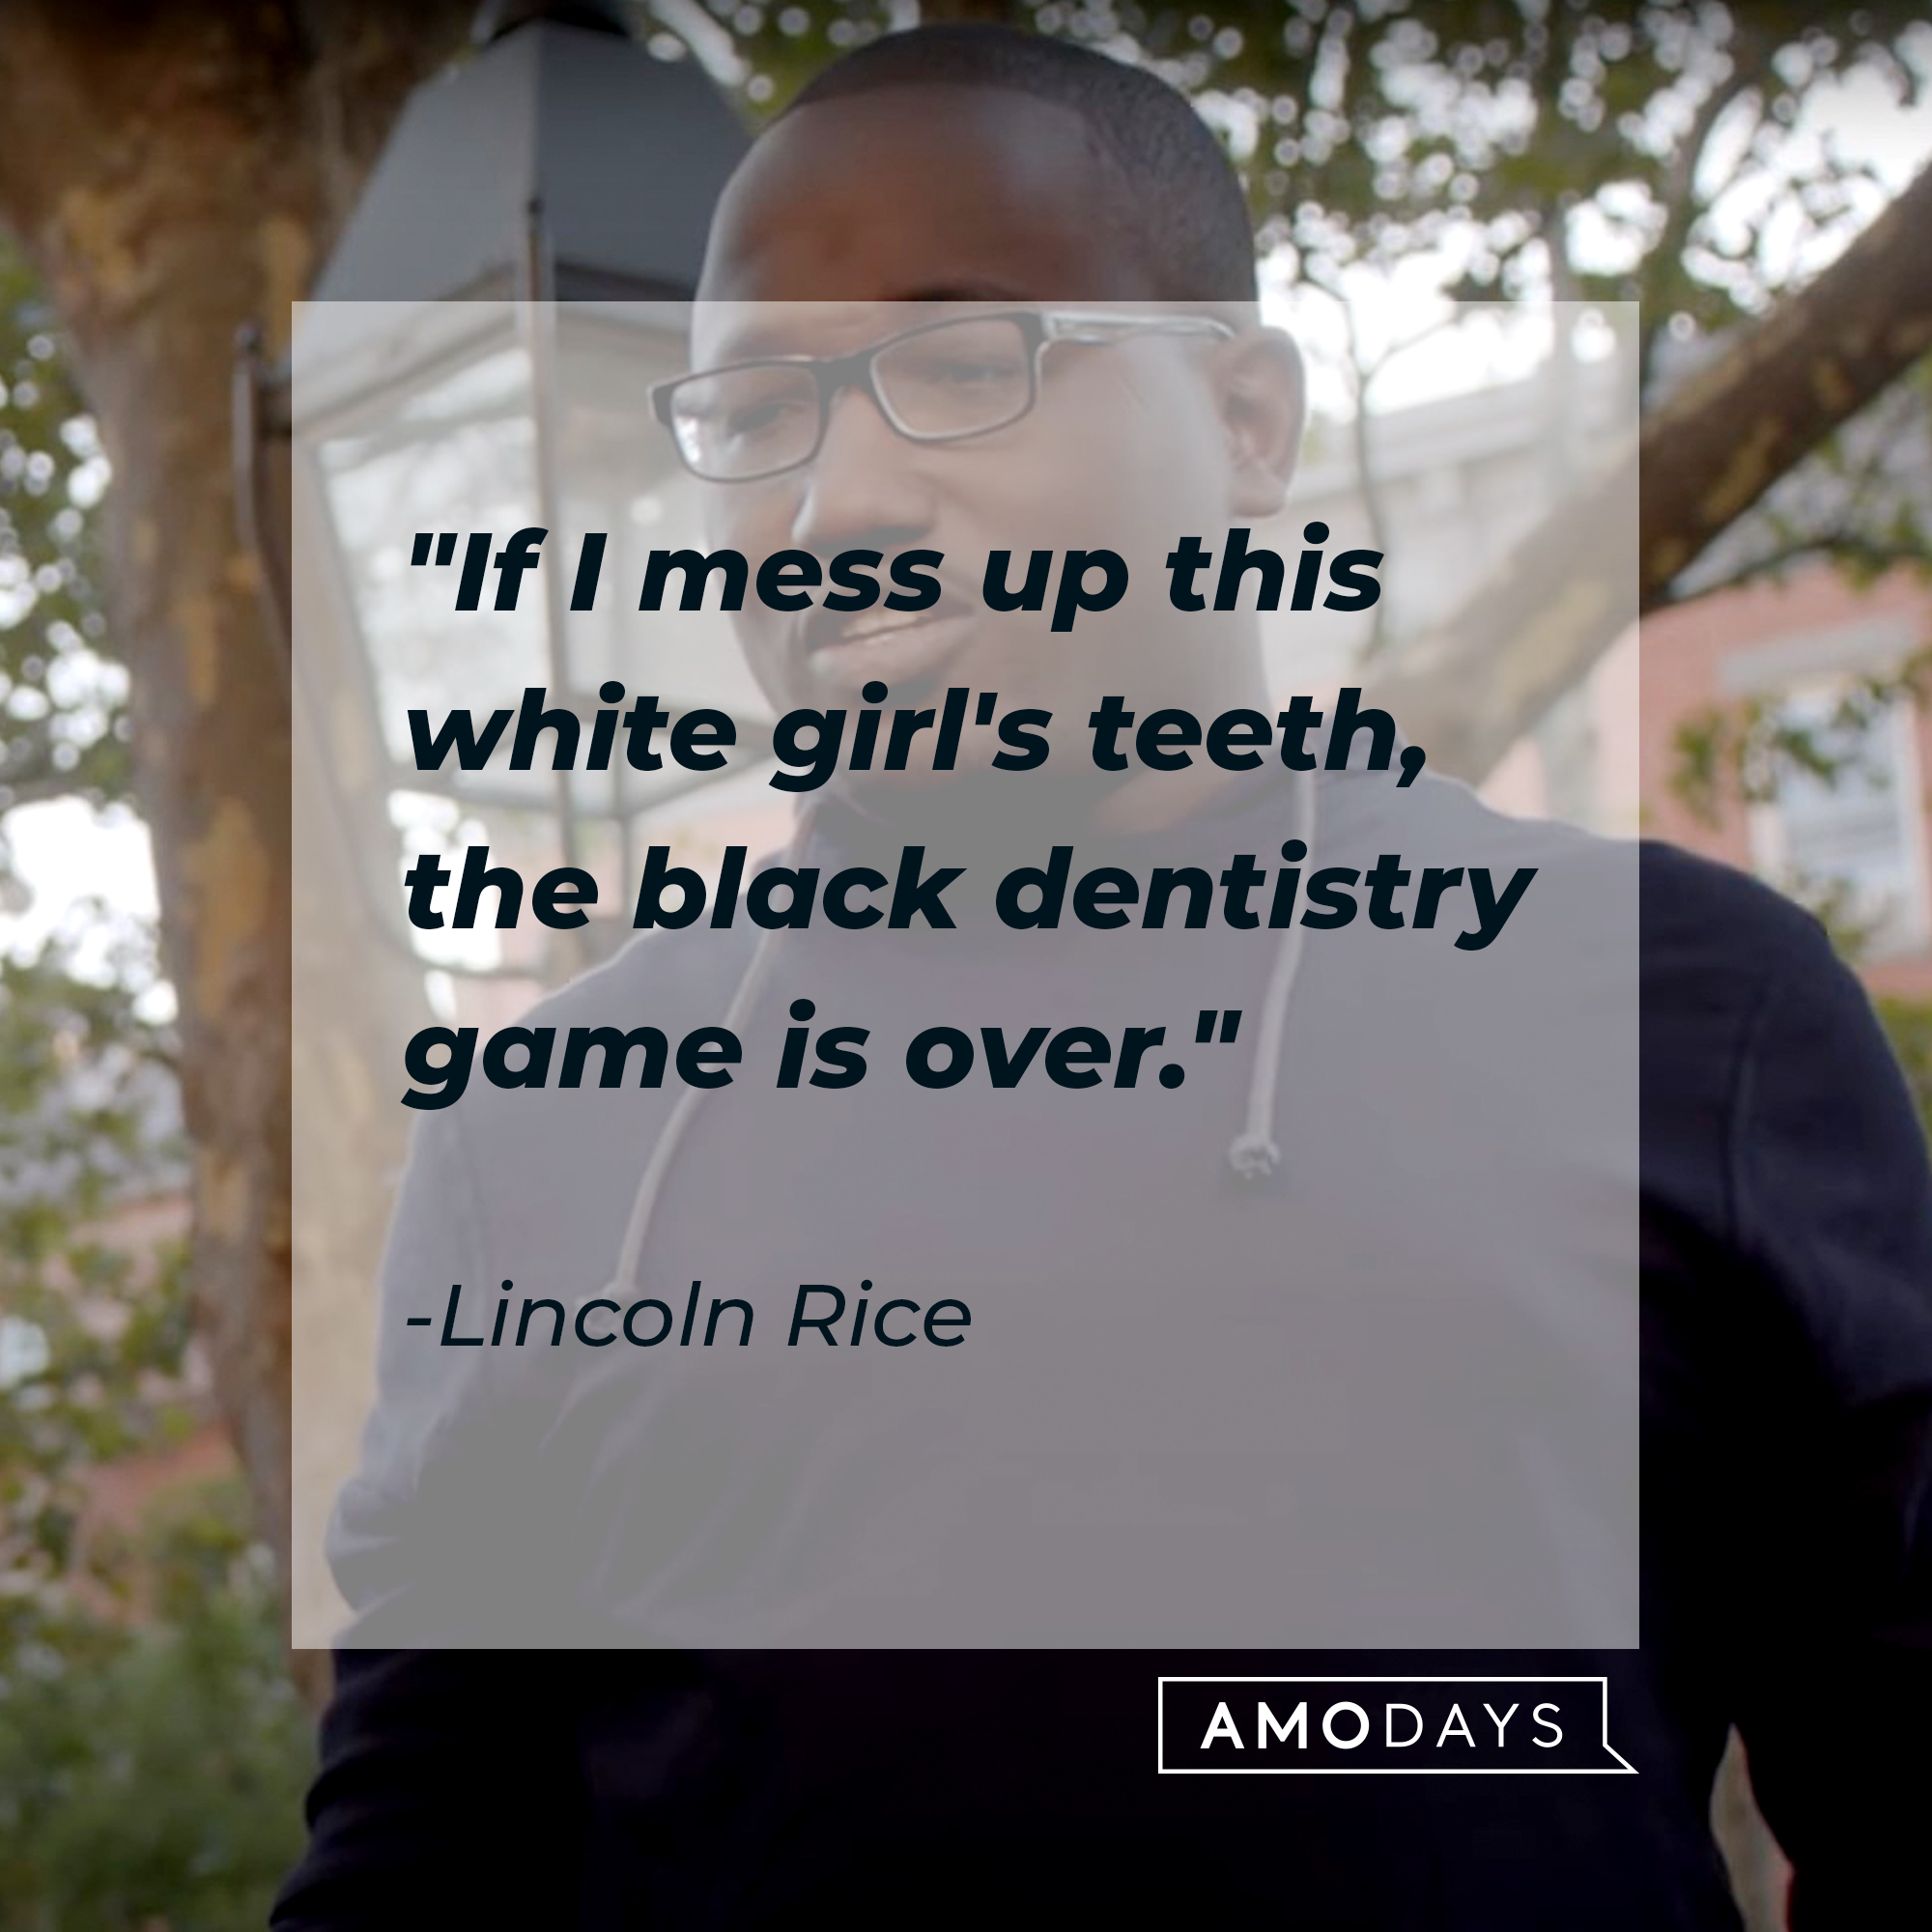 An image of Lincoln Rice with his quote: "If I mess up this white girl's teeth, the black dentistry game is over."  | Source: youtube.com/ComedyCentral